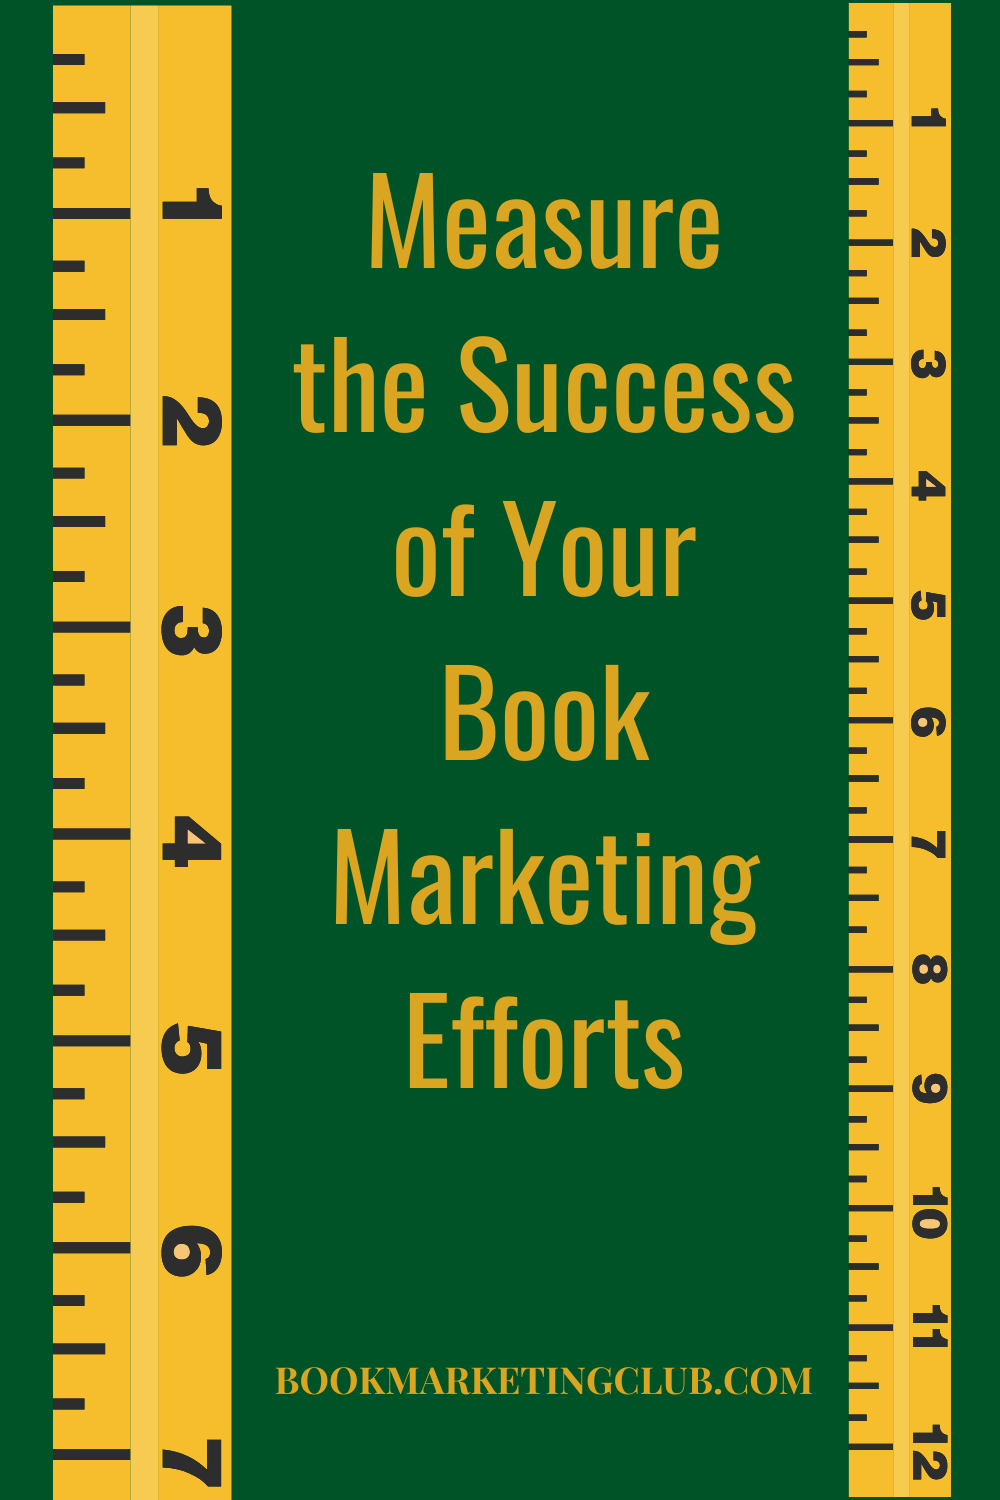 Measure the Success of Your Book Marketing Efforts